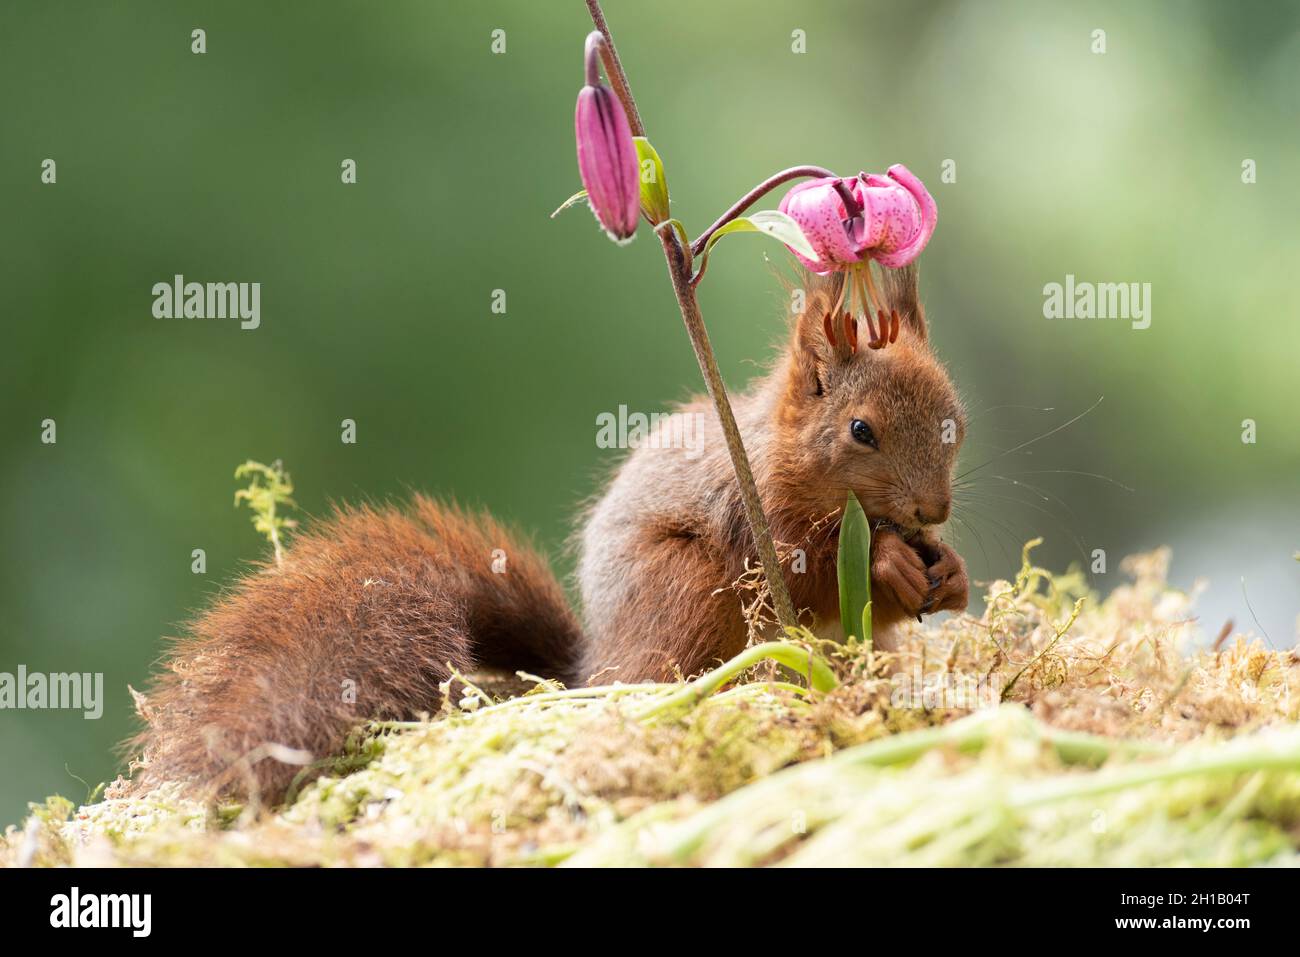 young red squirrel is standing under a Lilium martagon flower Stock Photo